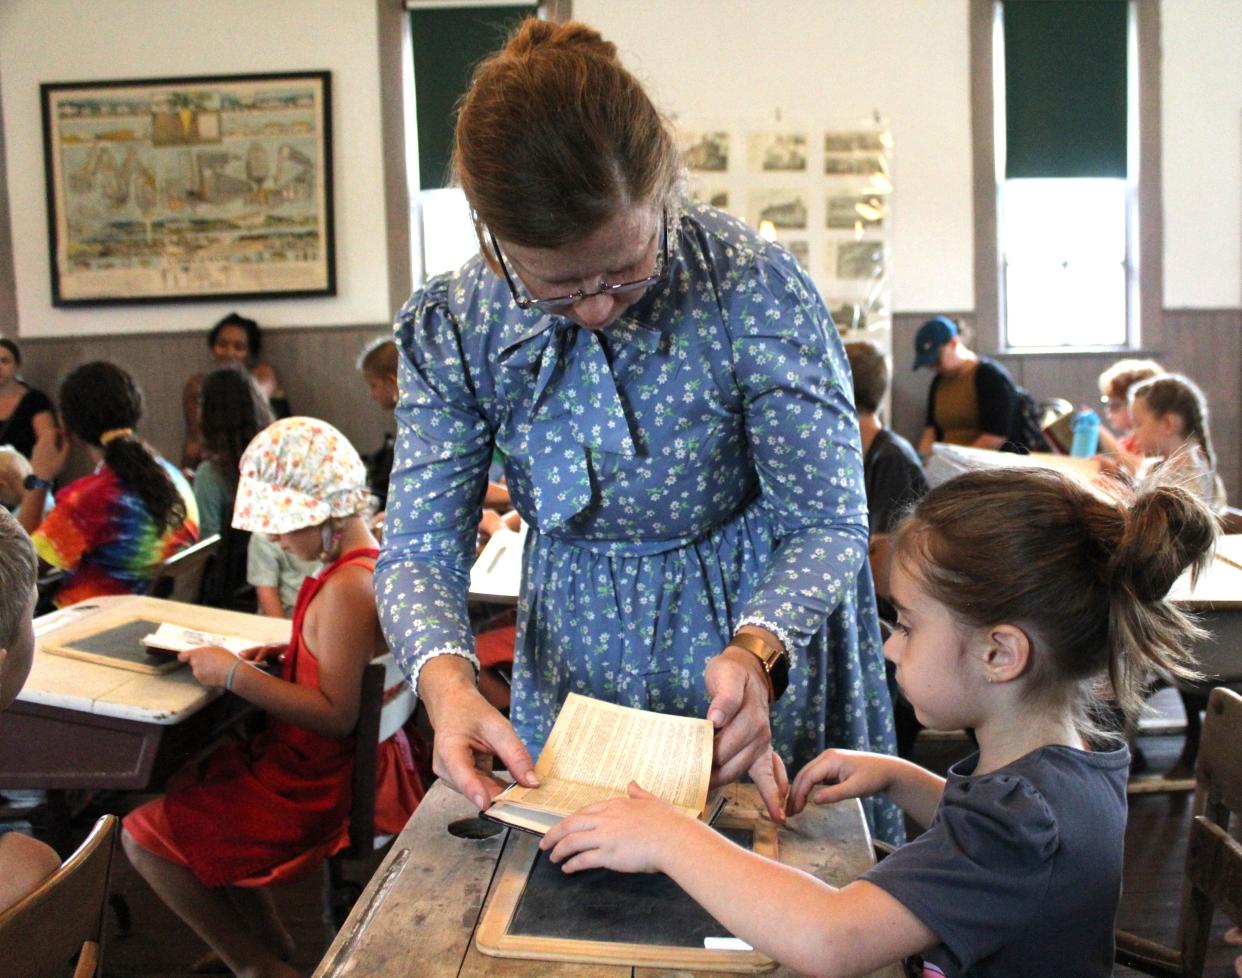 On Wednesday, Sept. 6. 2023, Heather Parker served as teacher for the day at the "Back to School Blast to the Past” hosted by Homeschool Wayfinders Community and the Exeter Historical Society. Parker has been homeschooling her children for 11 years.